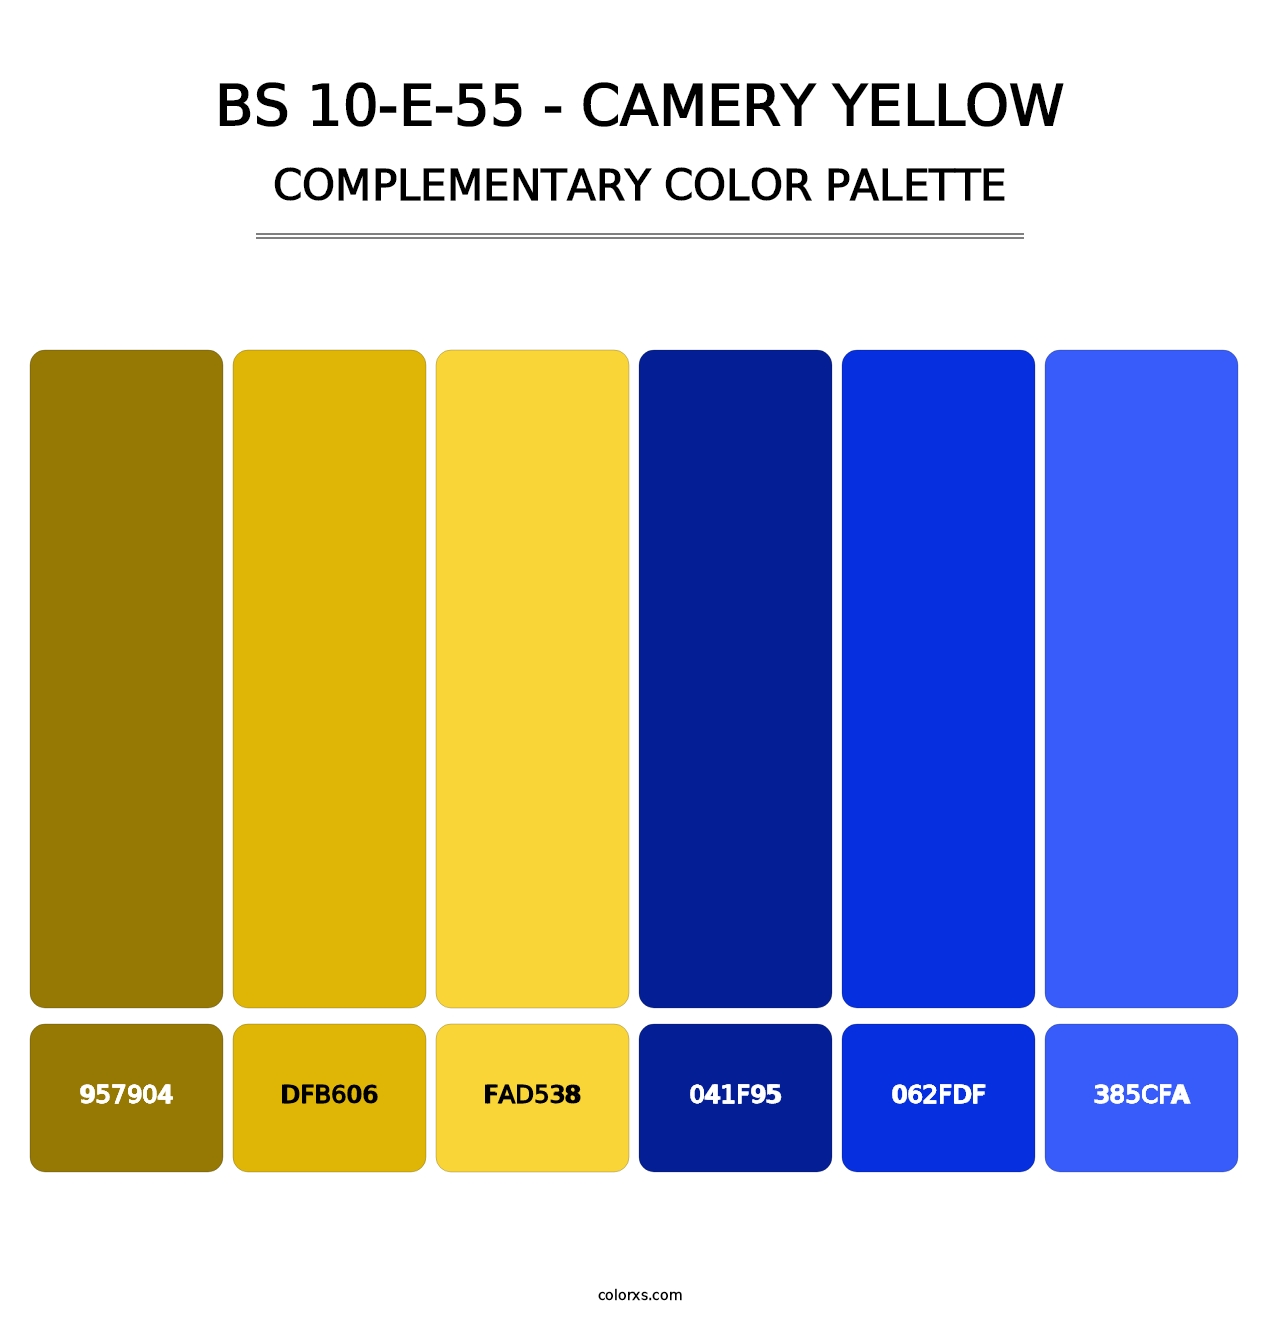 BS 10-E-55 - Camery Yellow - Complementary Color Palette